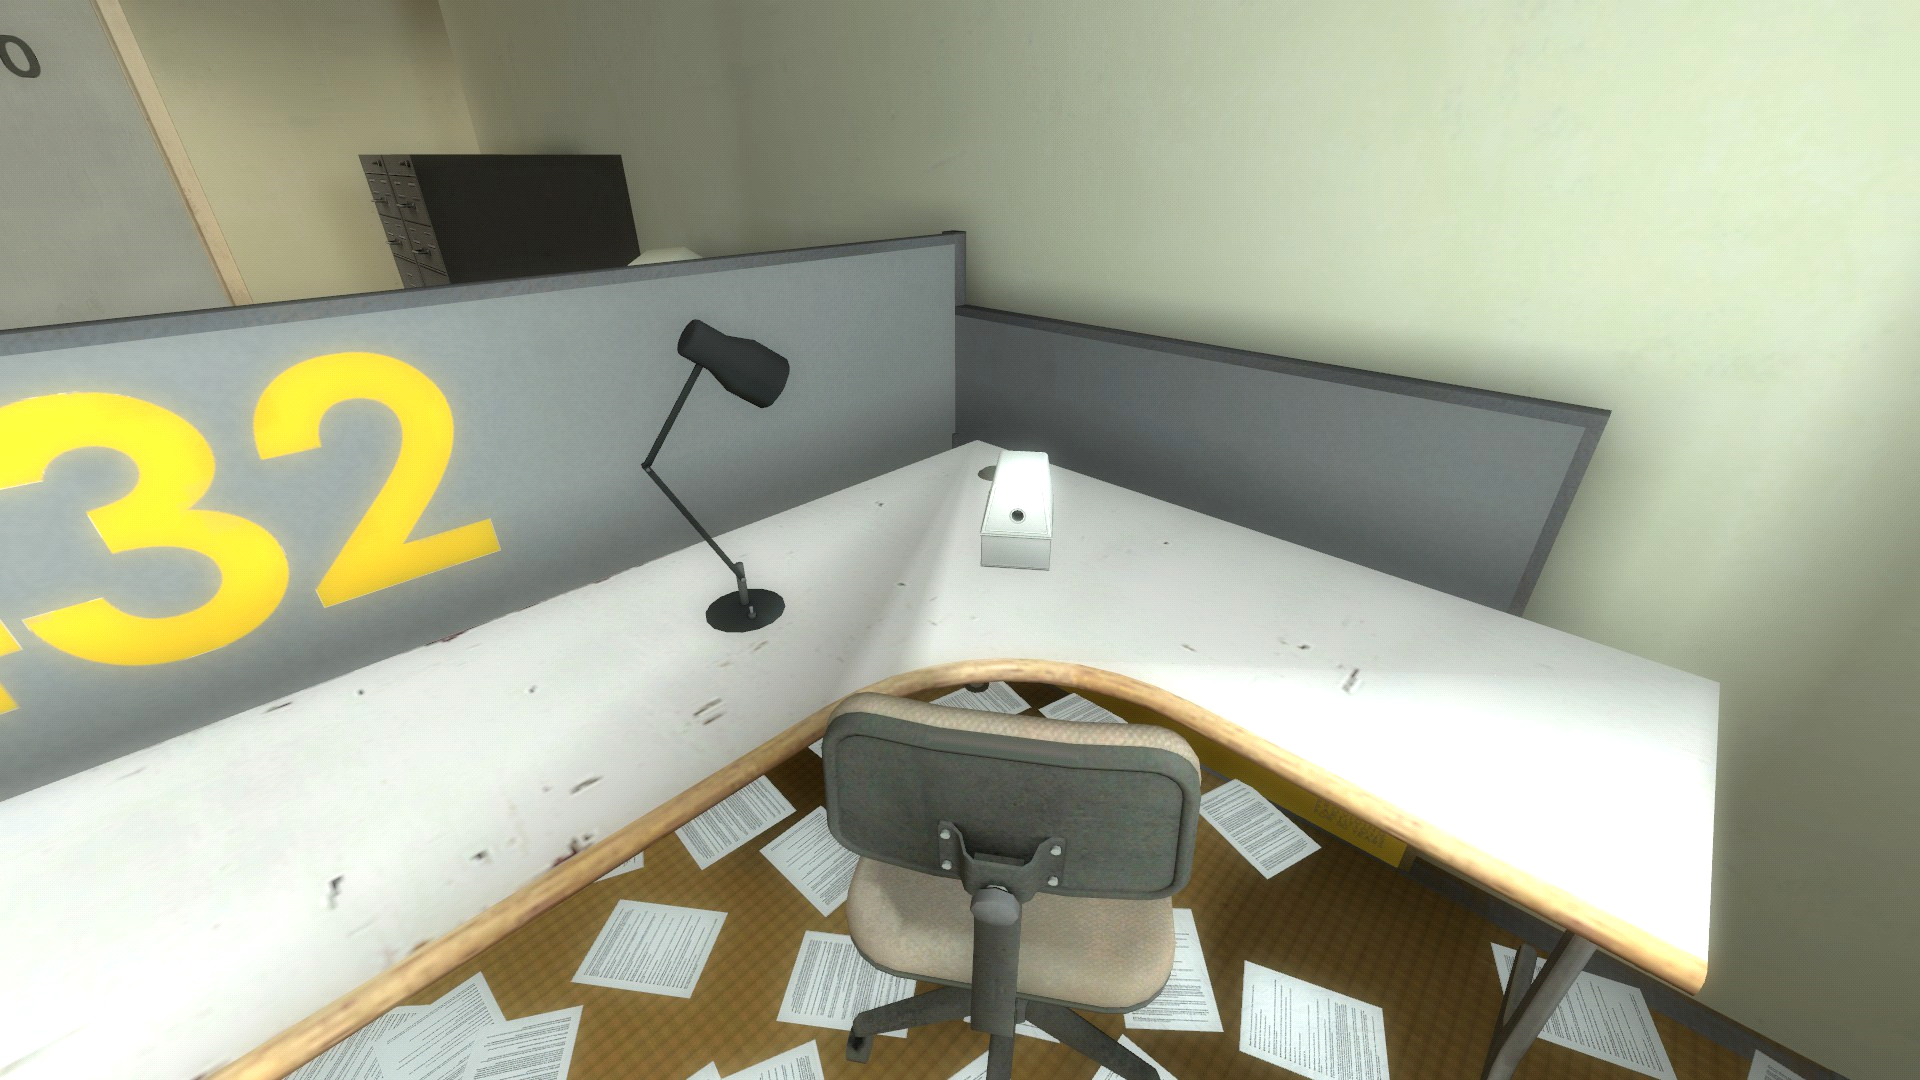 The Stanley Parable Gameplay